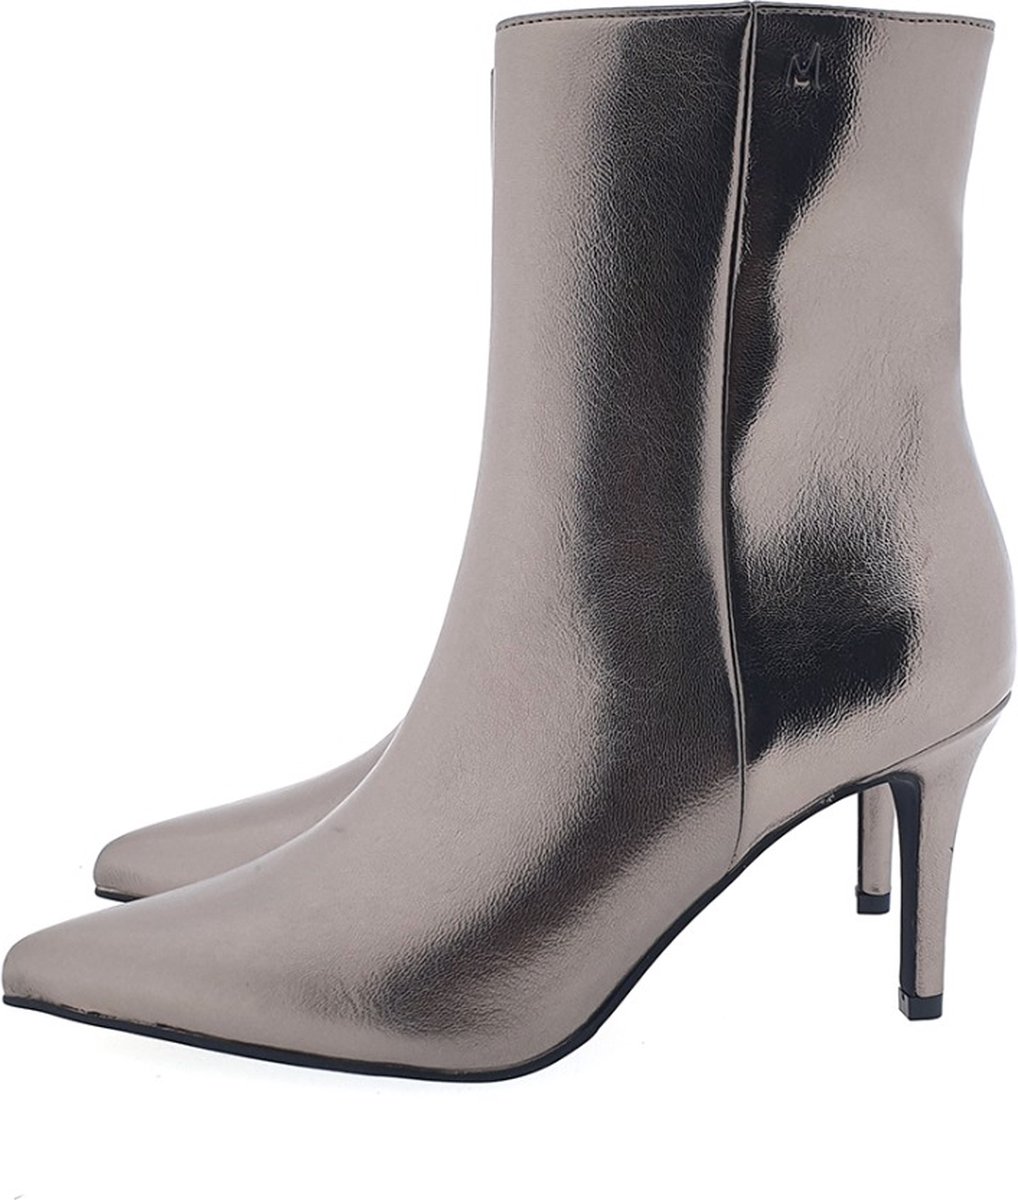 Mexx Ankle Boot Merlin platina, 37 / 4